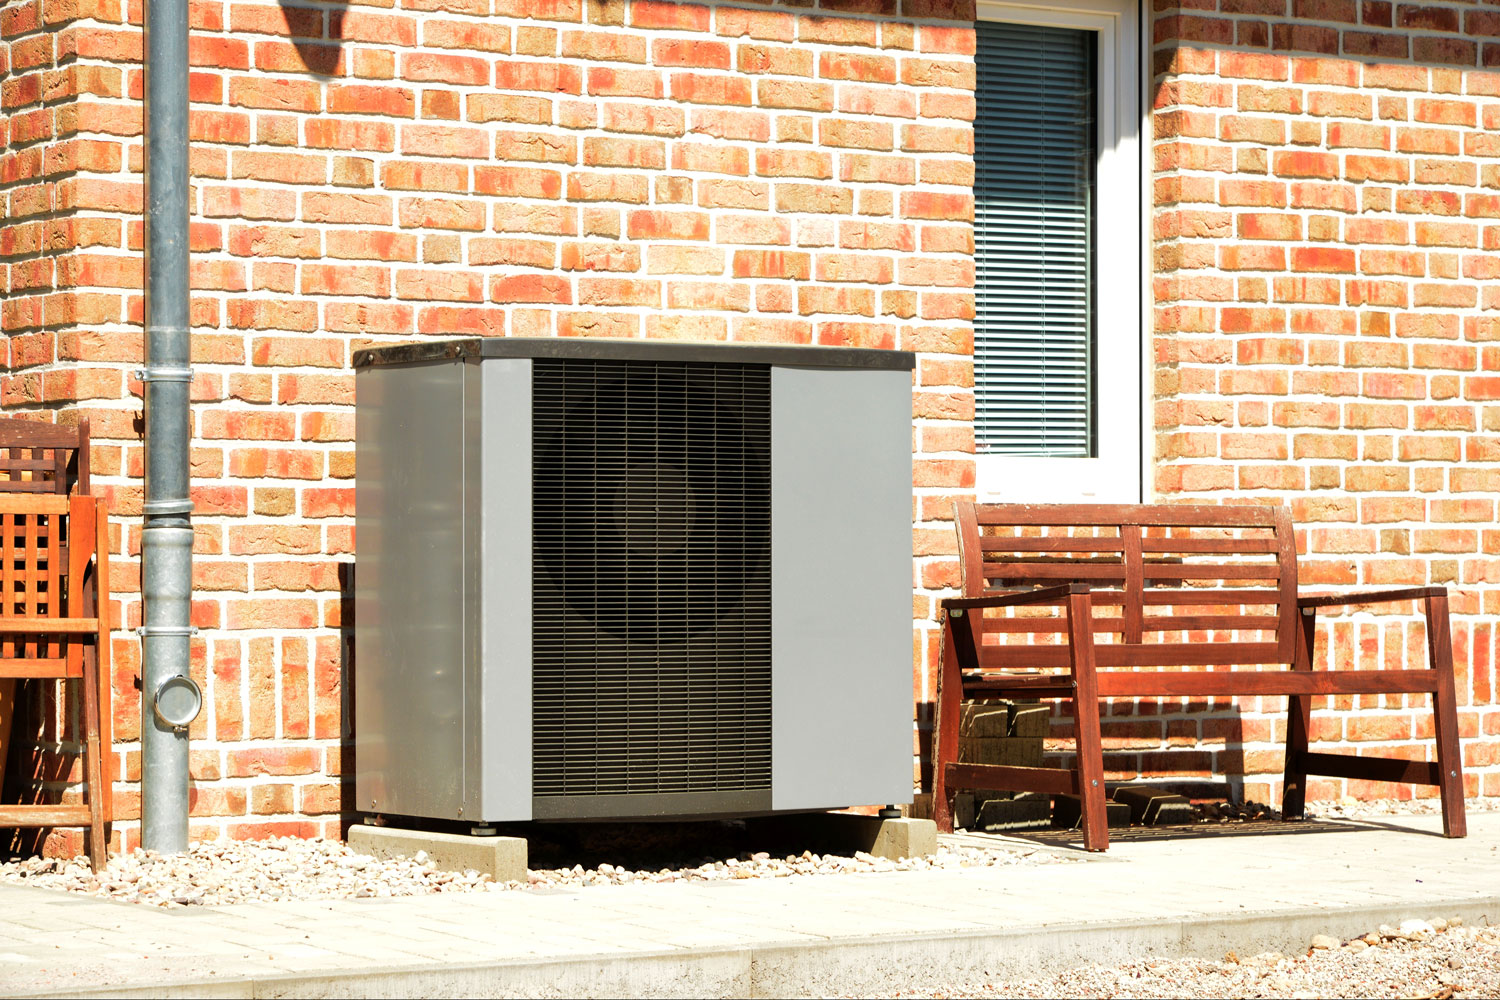 A heat pump for a small brick house